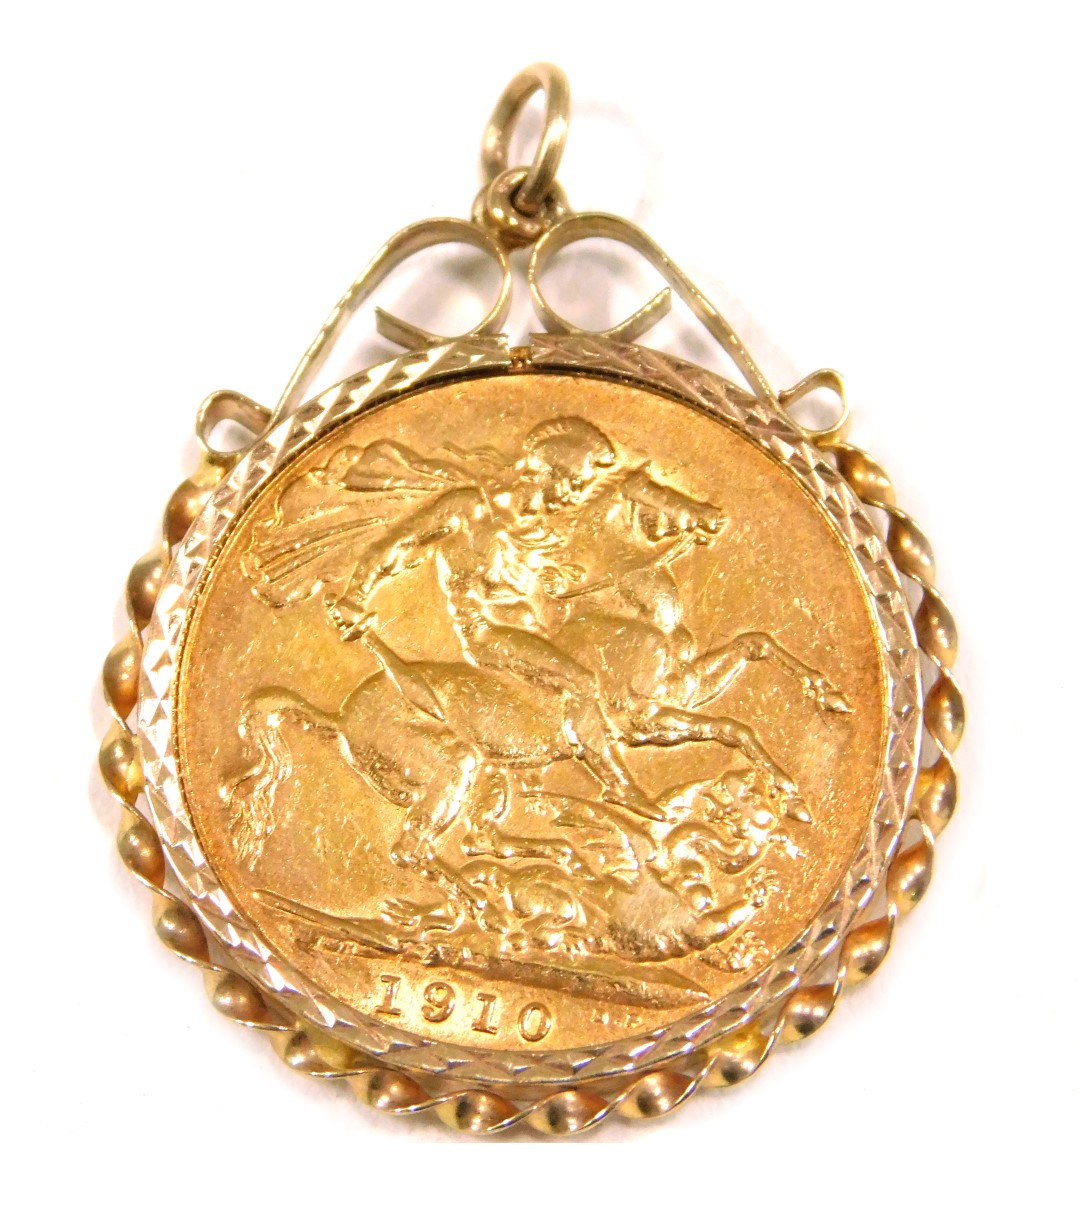 An Edward VII full gold sovereign pendant, dated 1910, in a 9ct gold twist work pendant mount, 9.1g